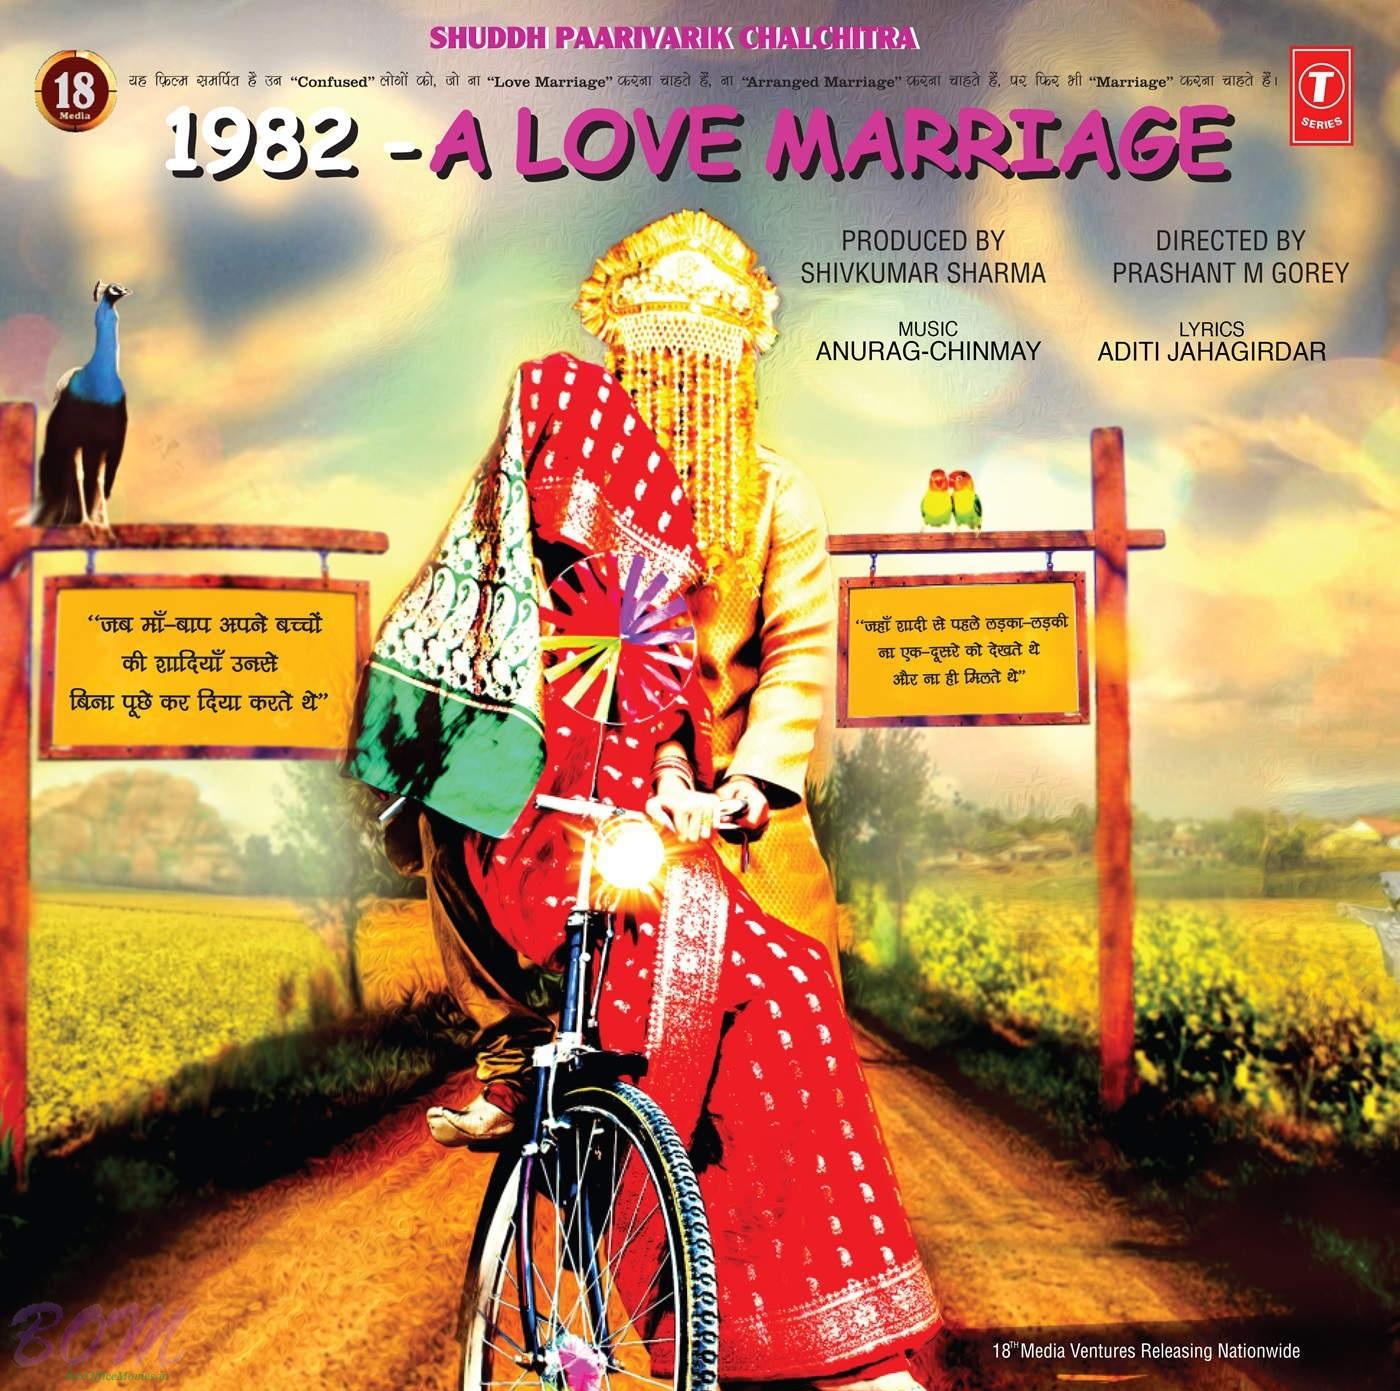 1982 - A Love Marriage movie Poster